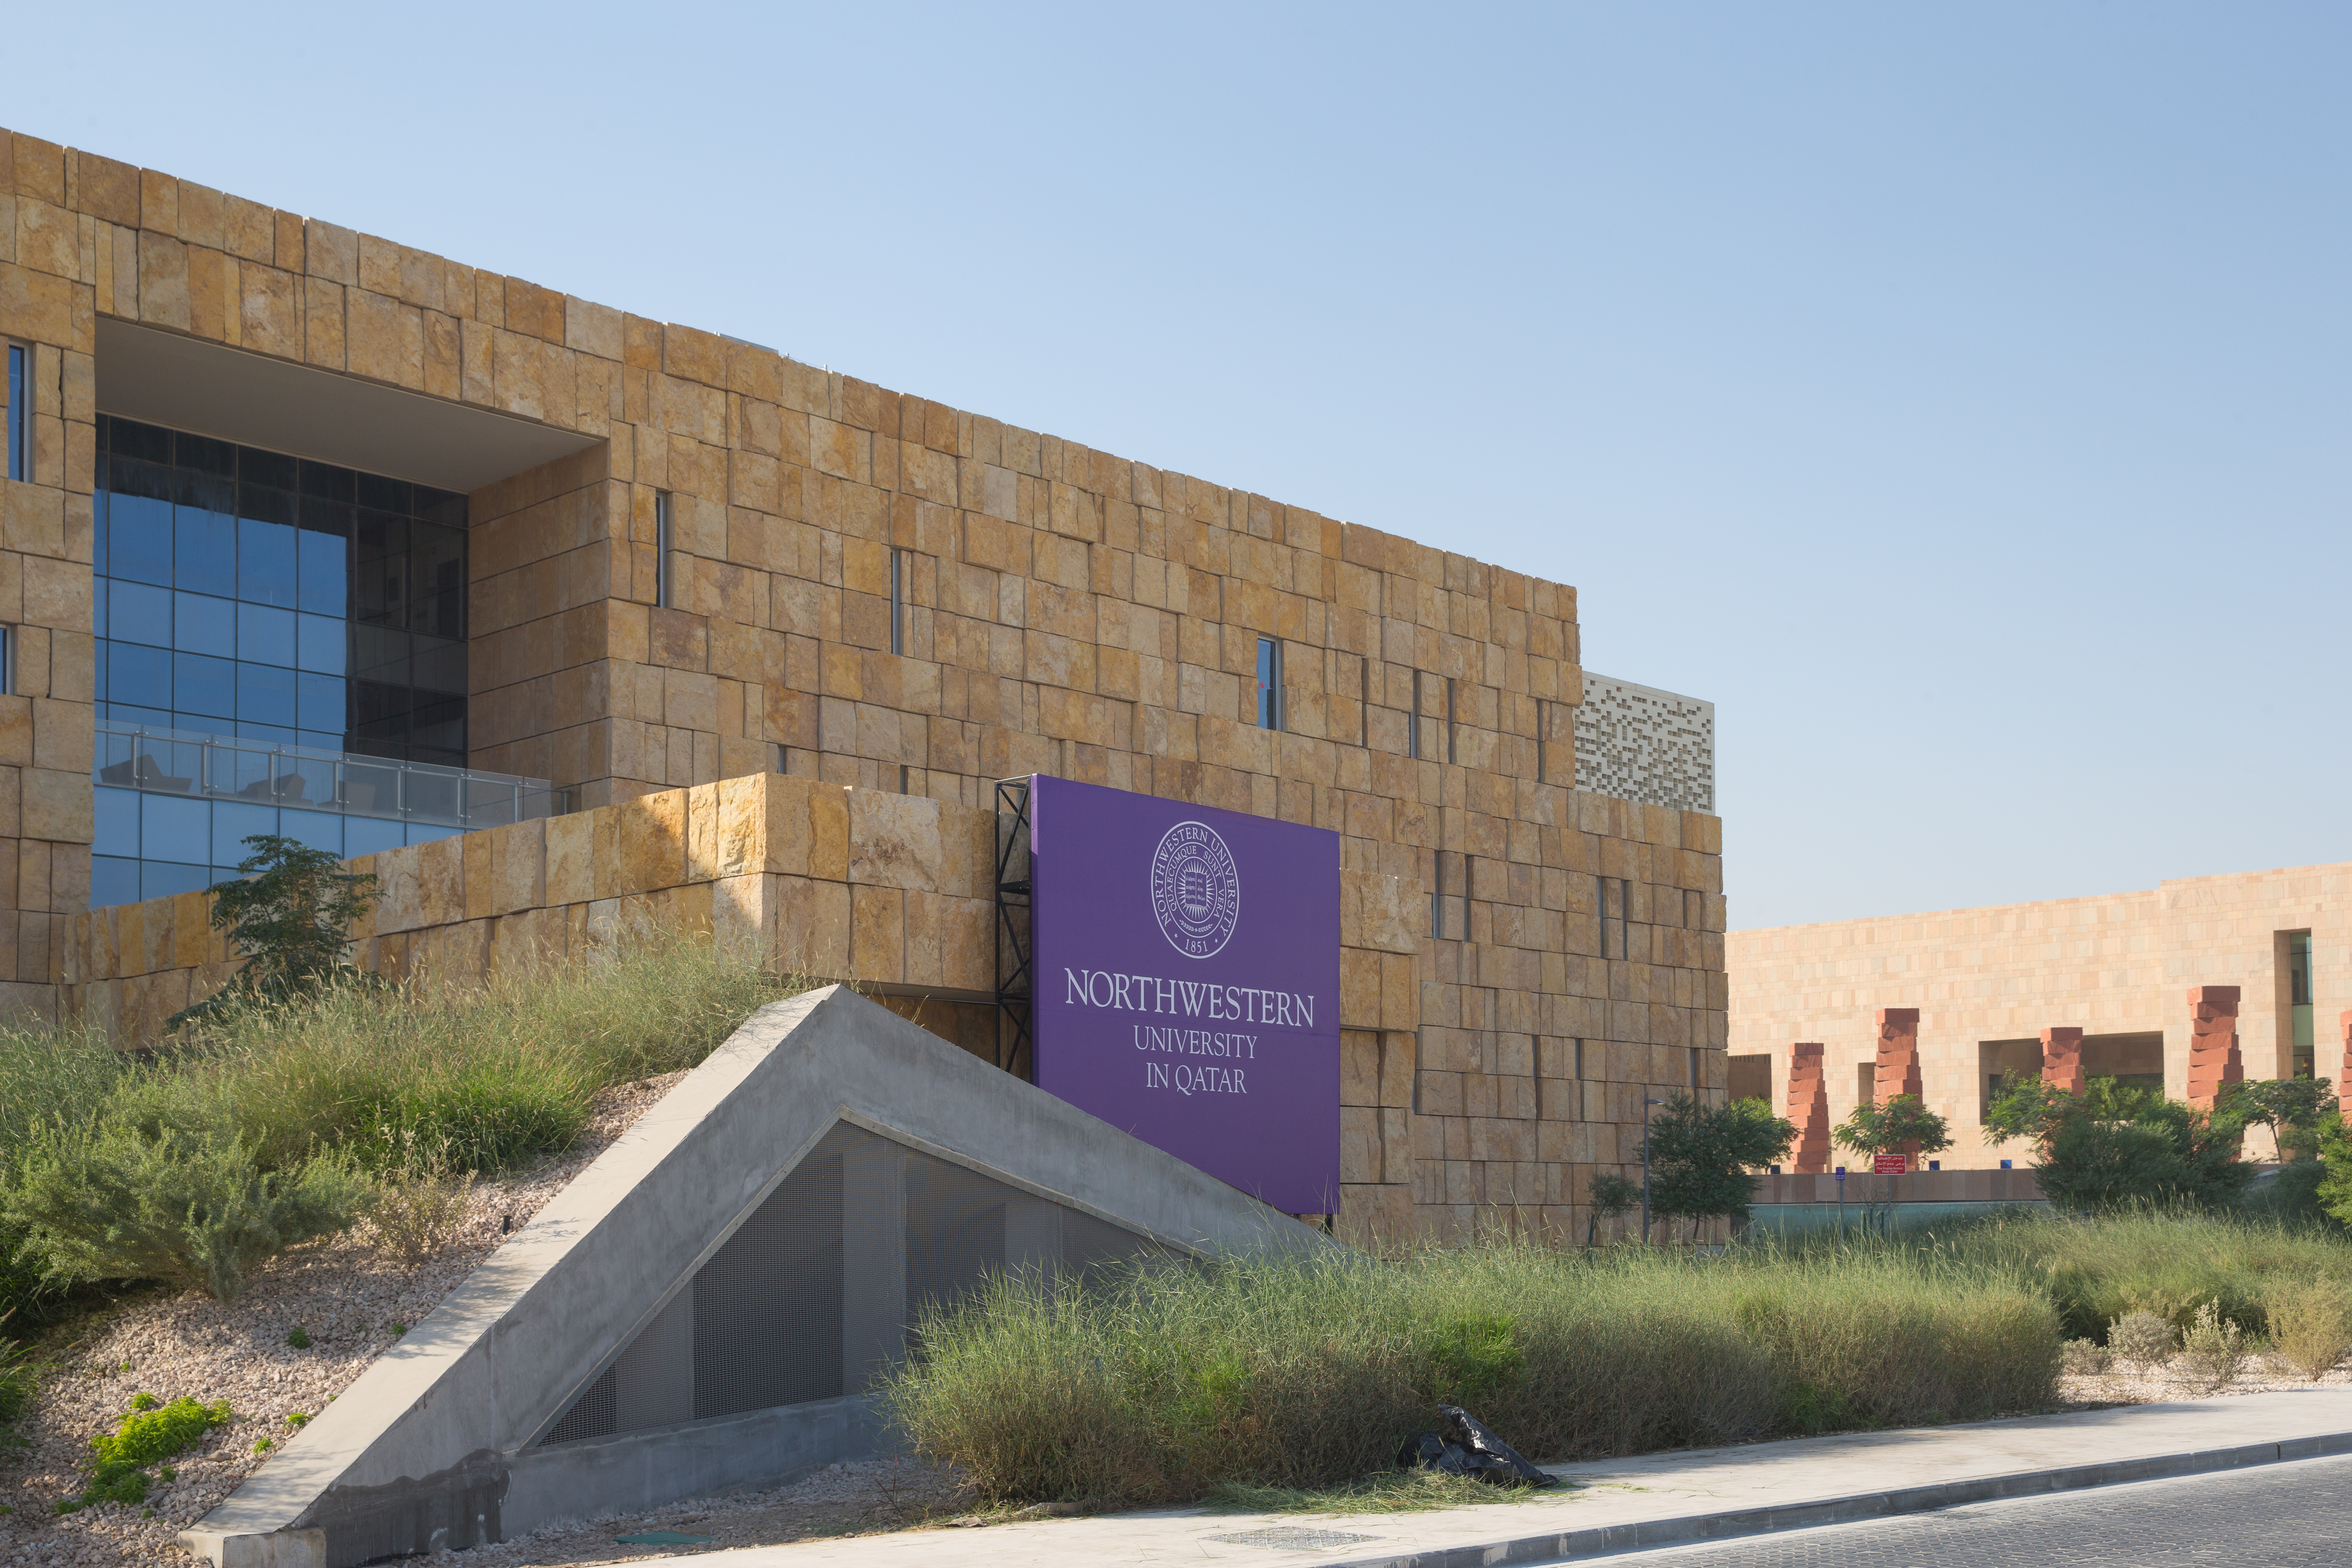 The front of the Northwestern building in Qatar